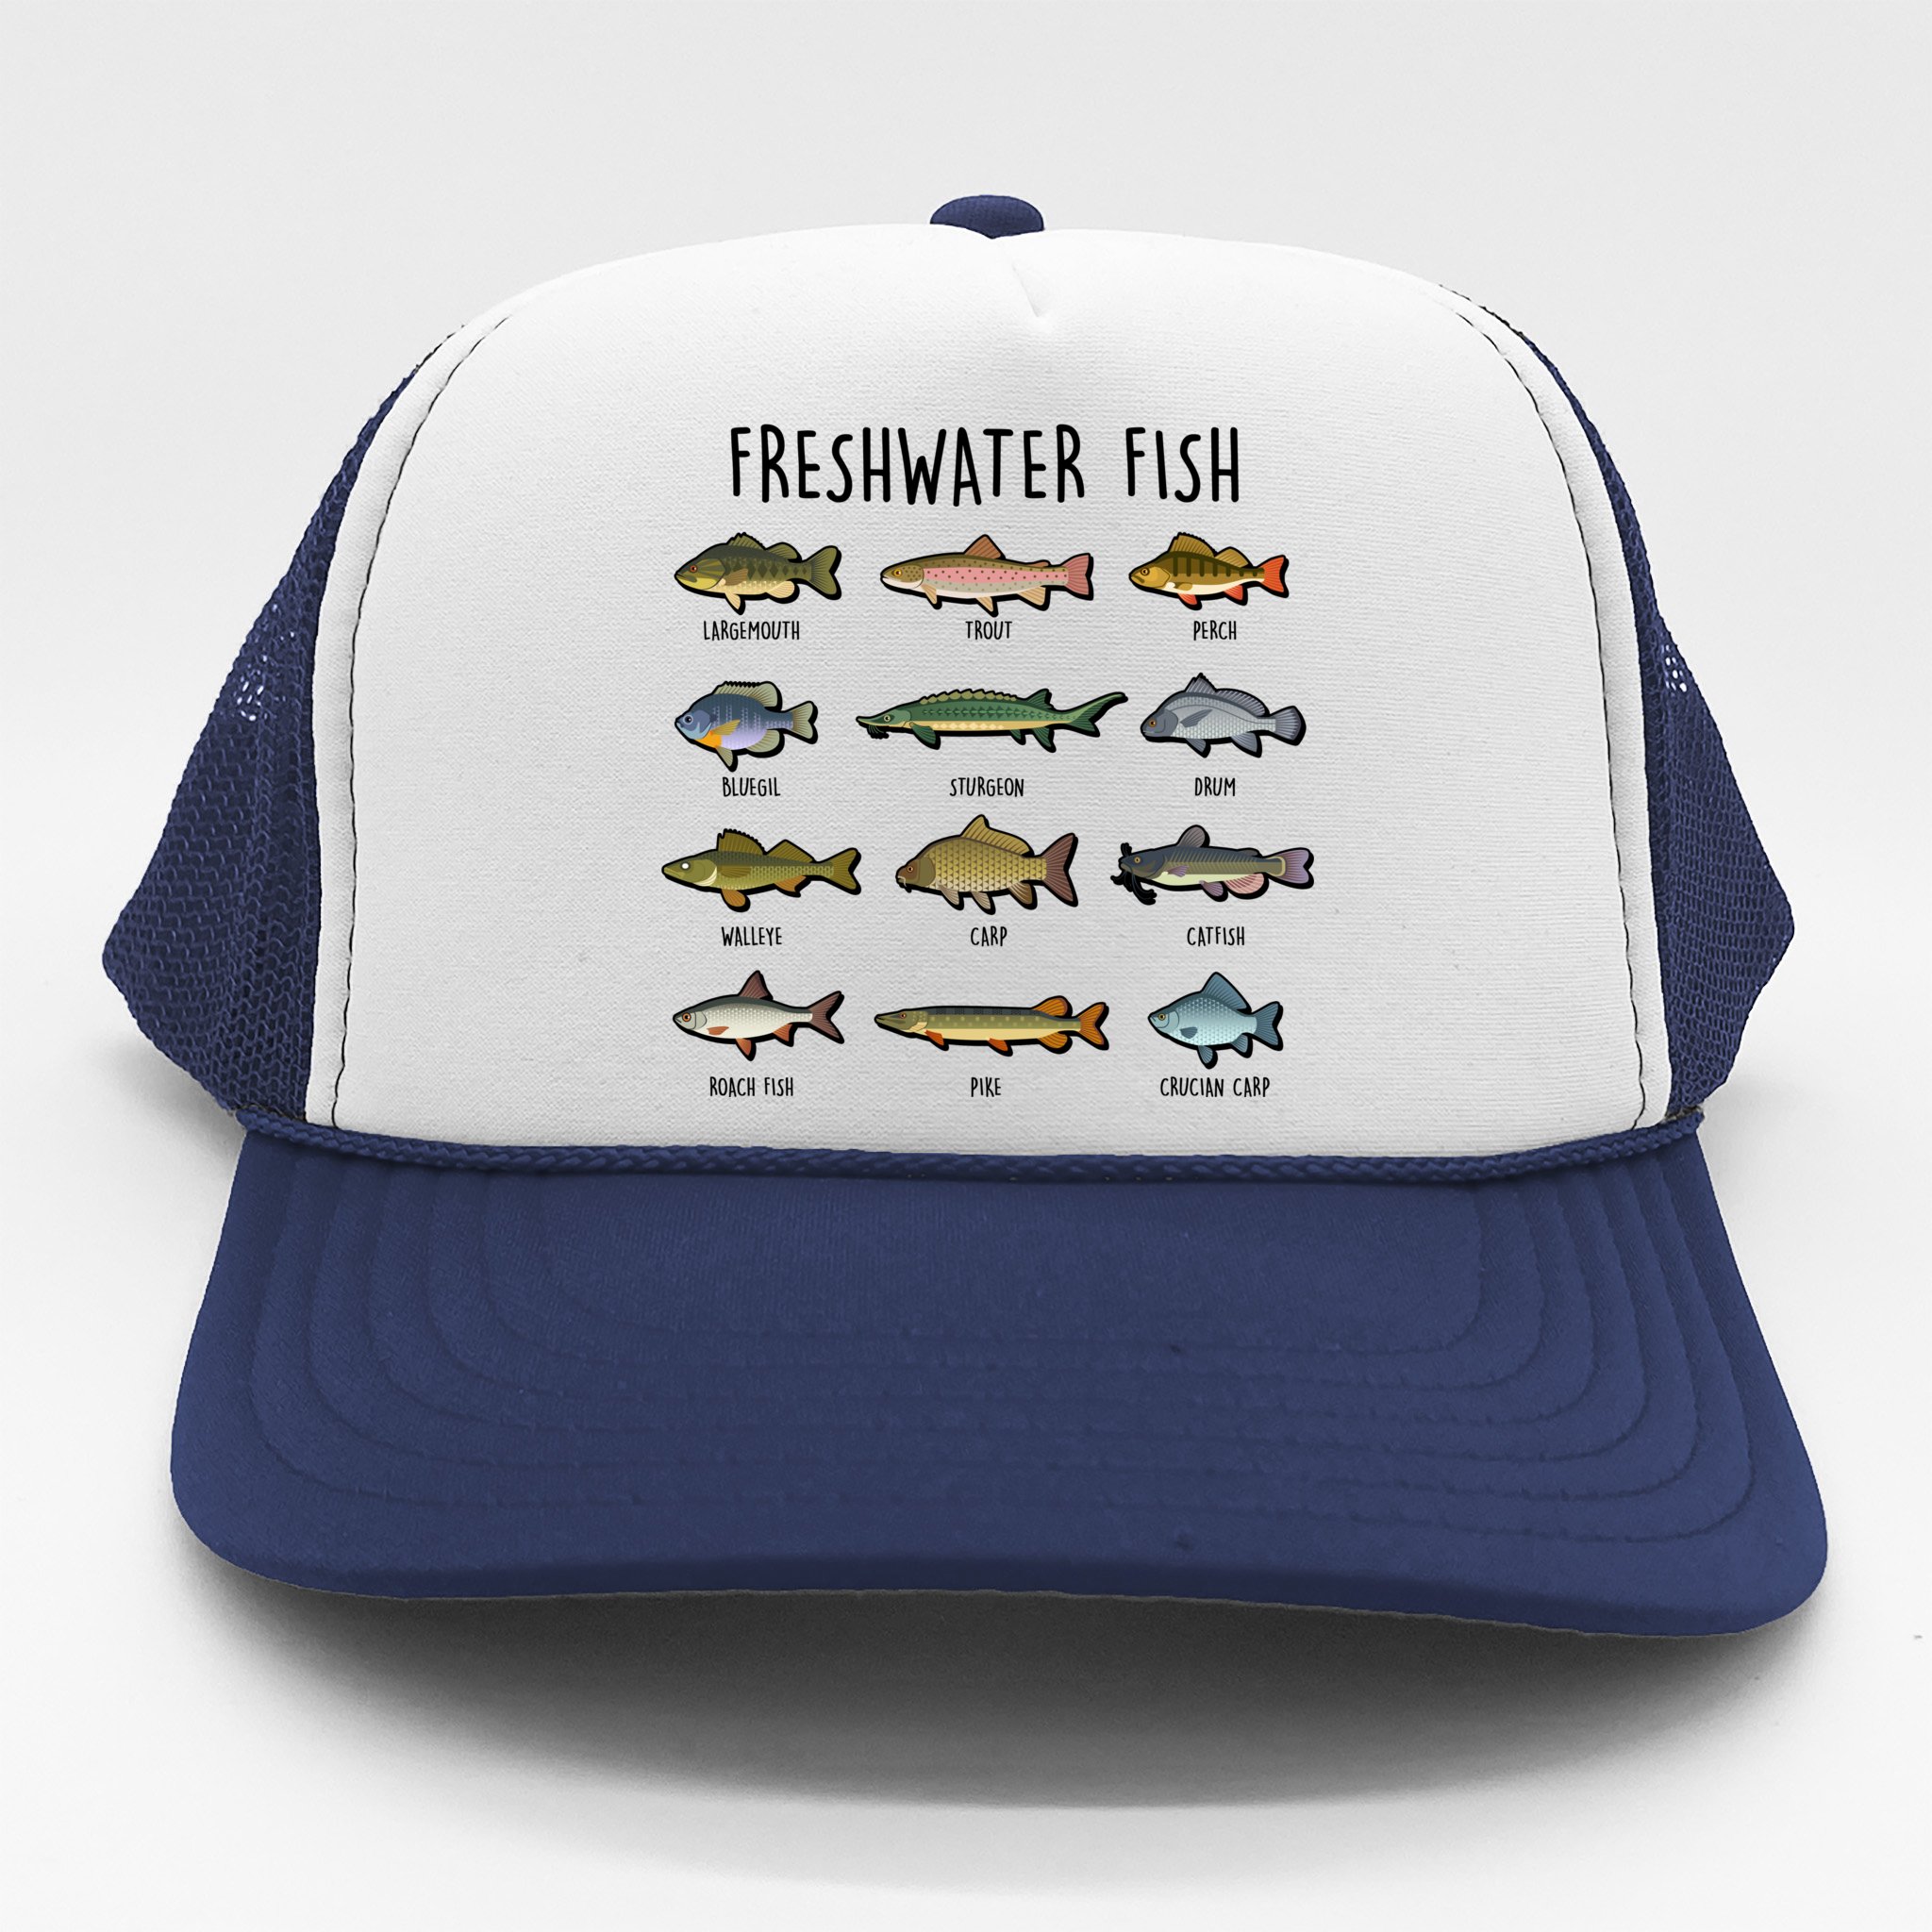 https://images3.teeshirtpalace.com/images/productImages/freshwater-fish--navy-th-garment.jpg